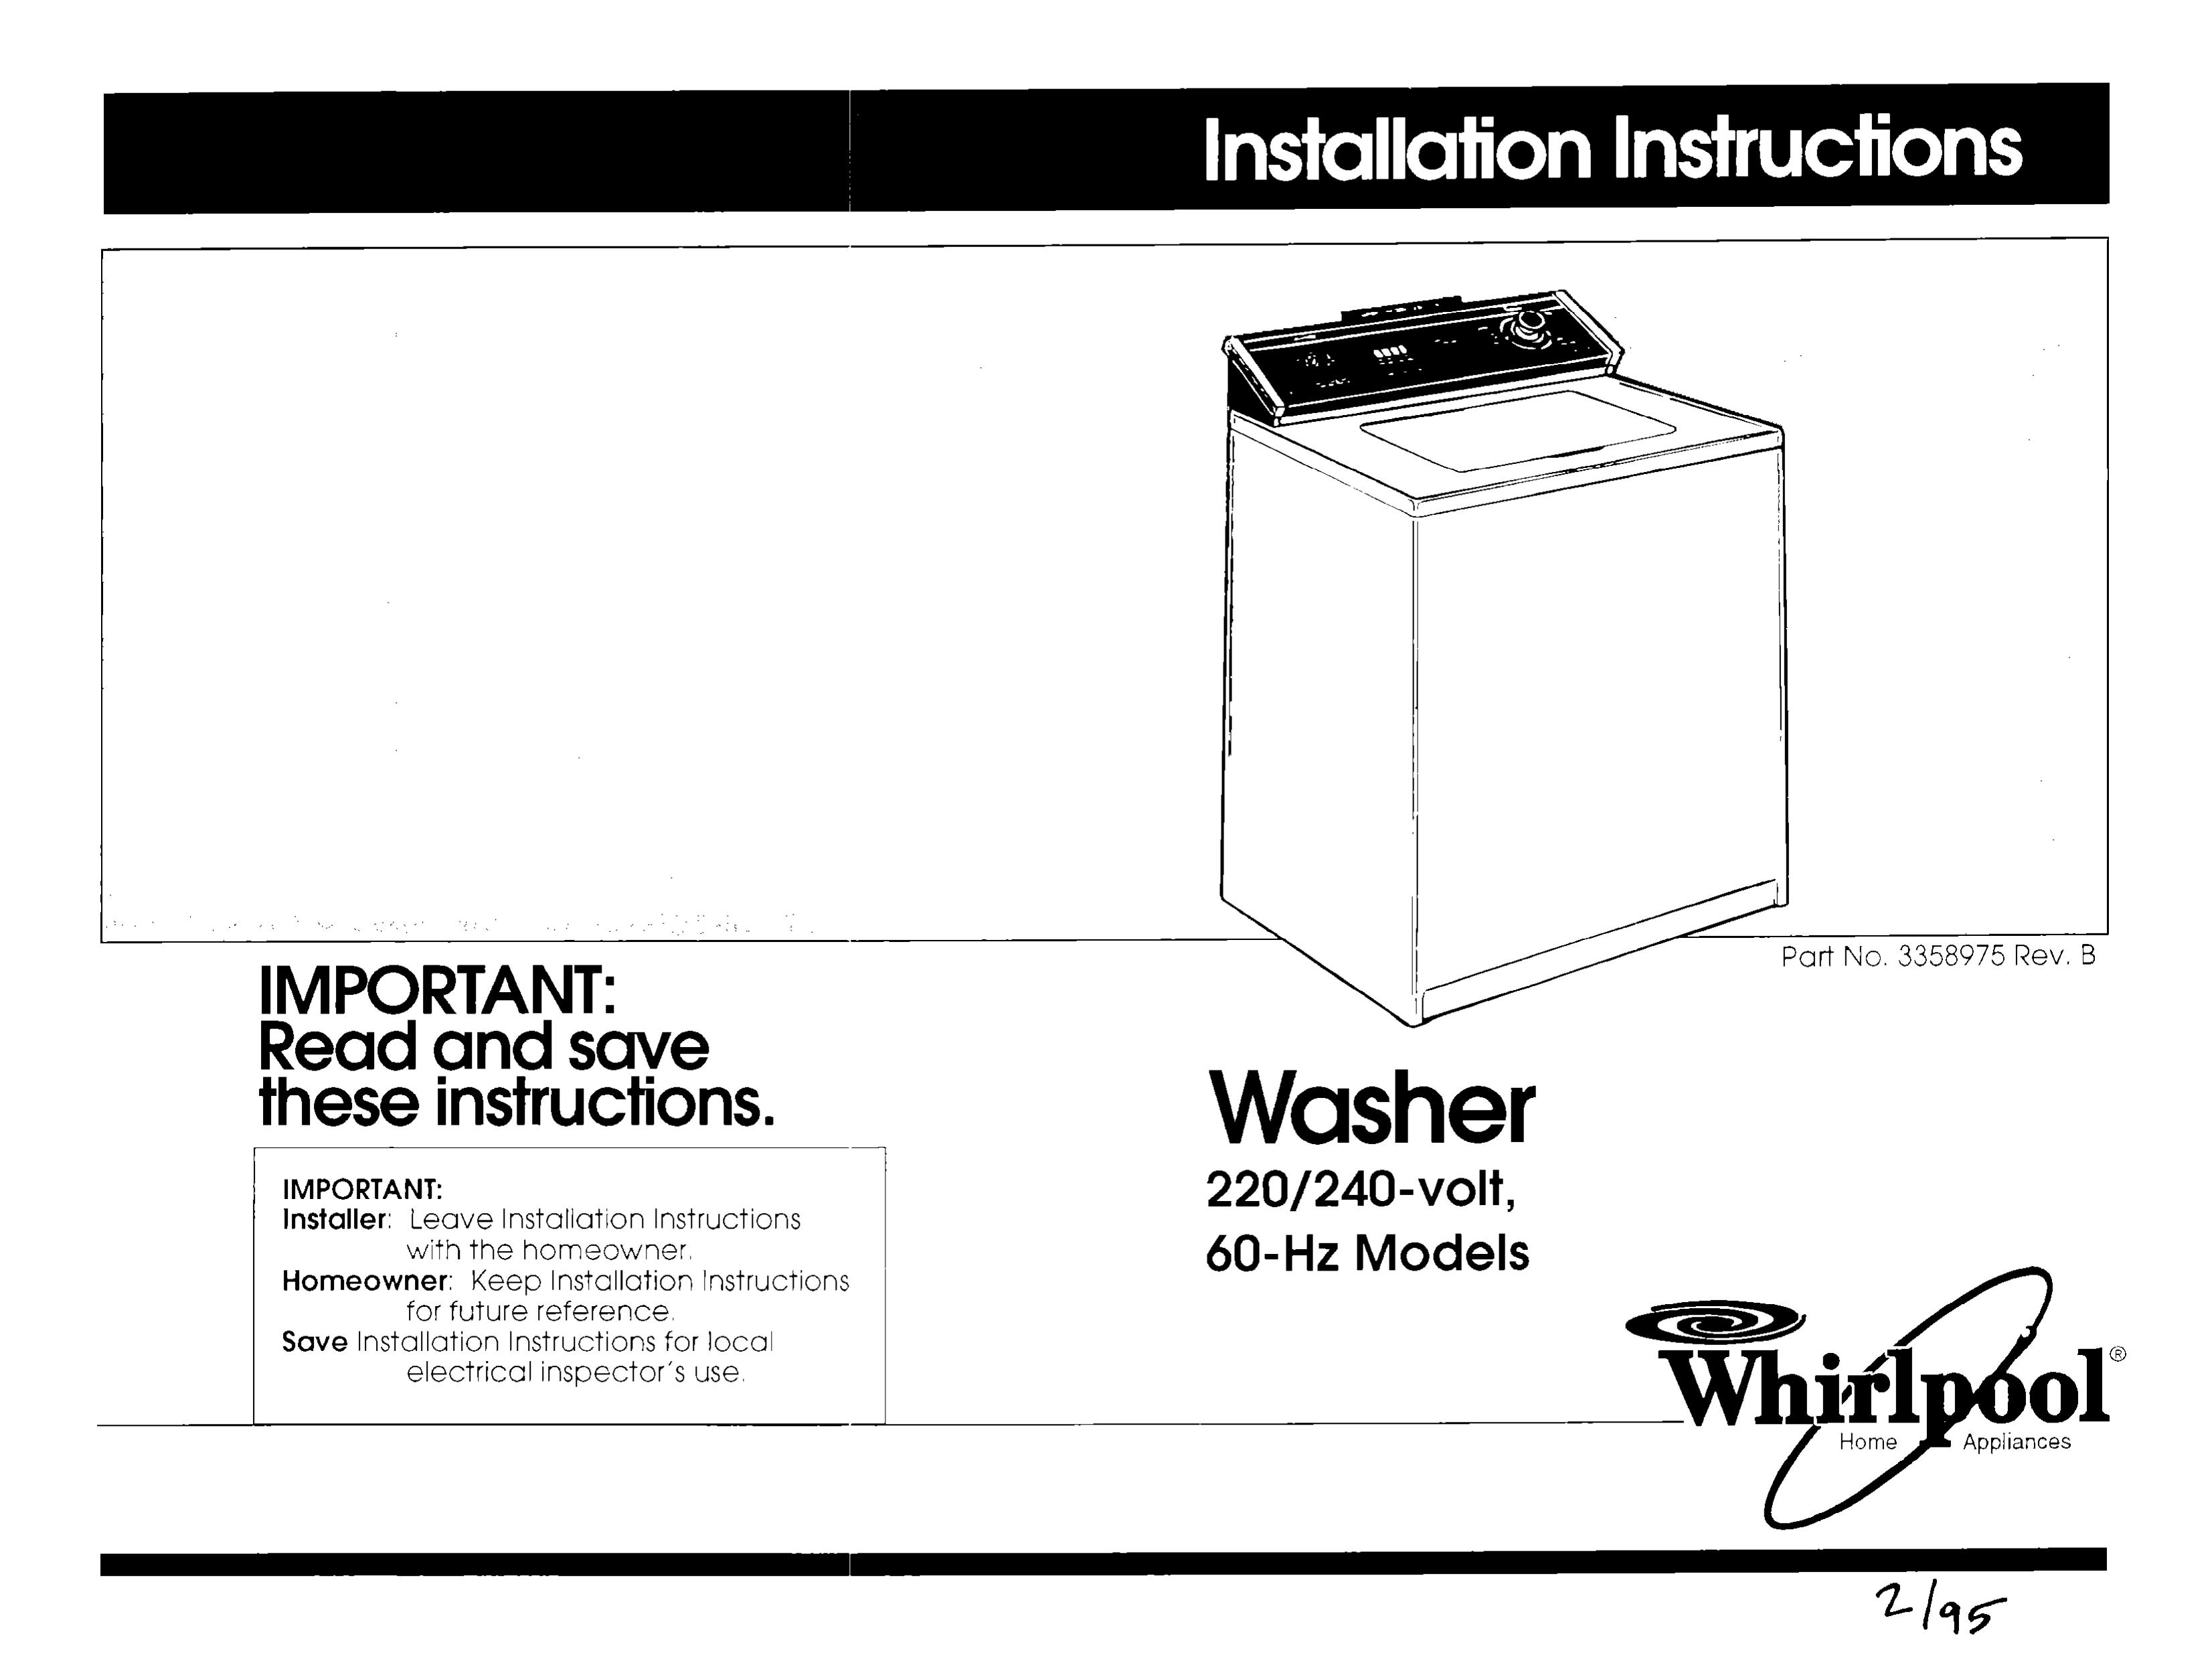 Whirlpool 220/240-volt Washer User Manual